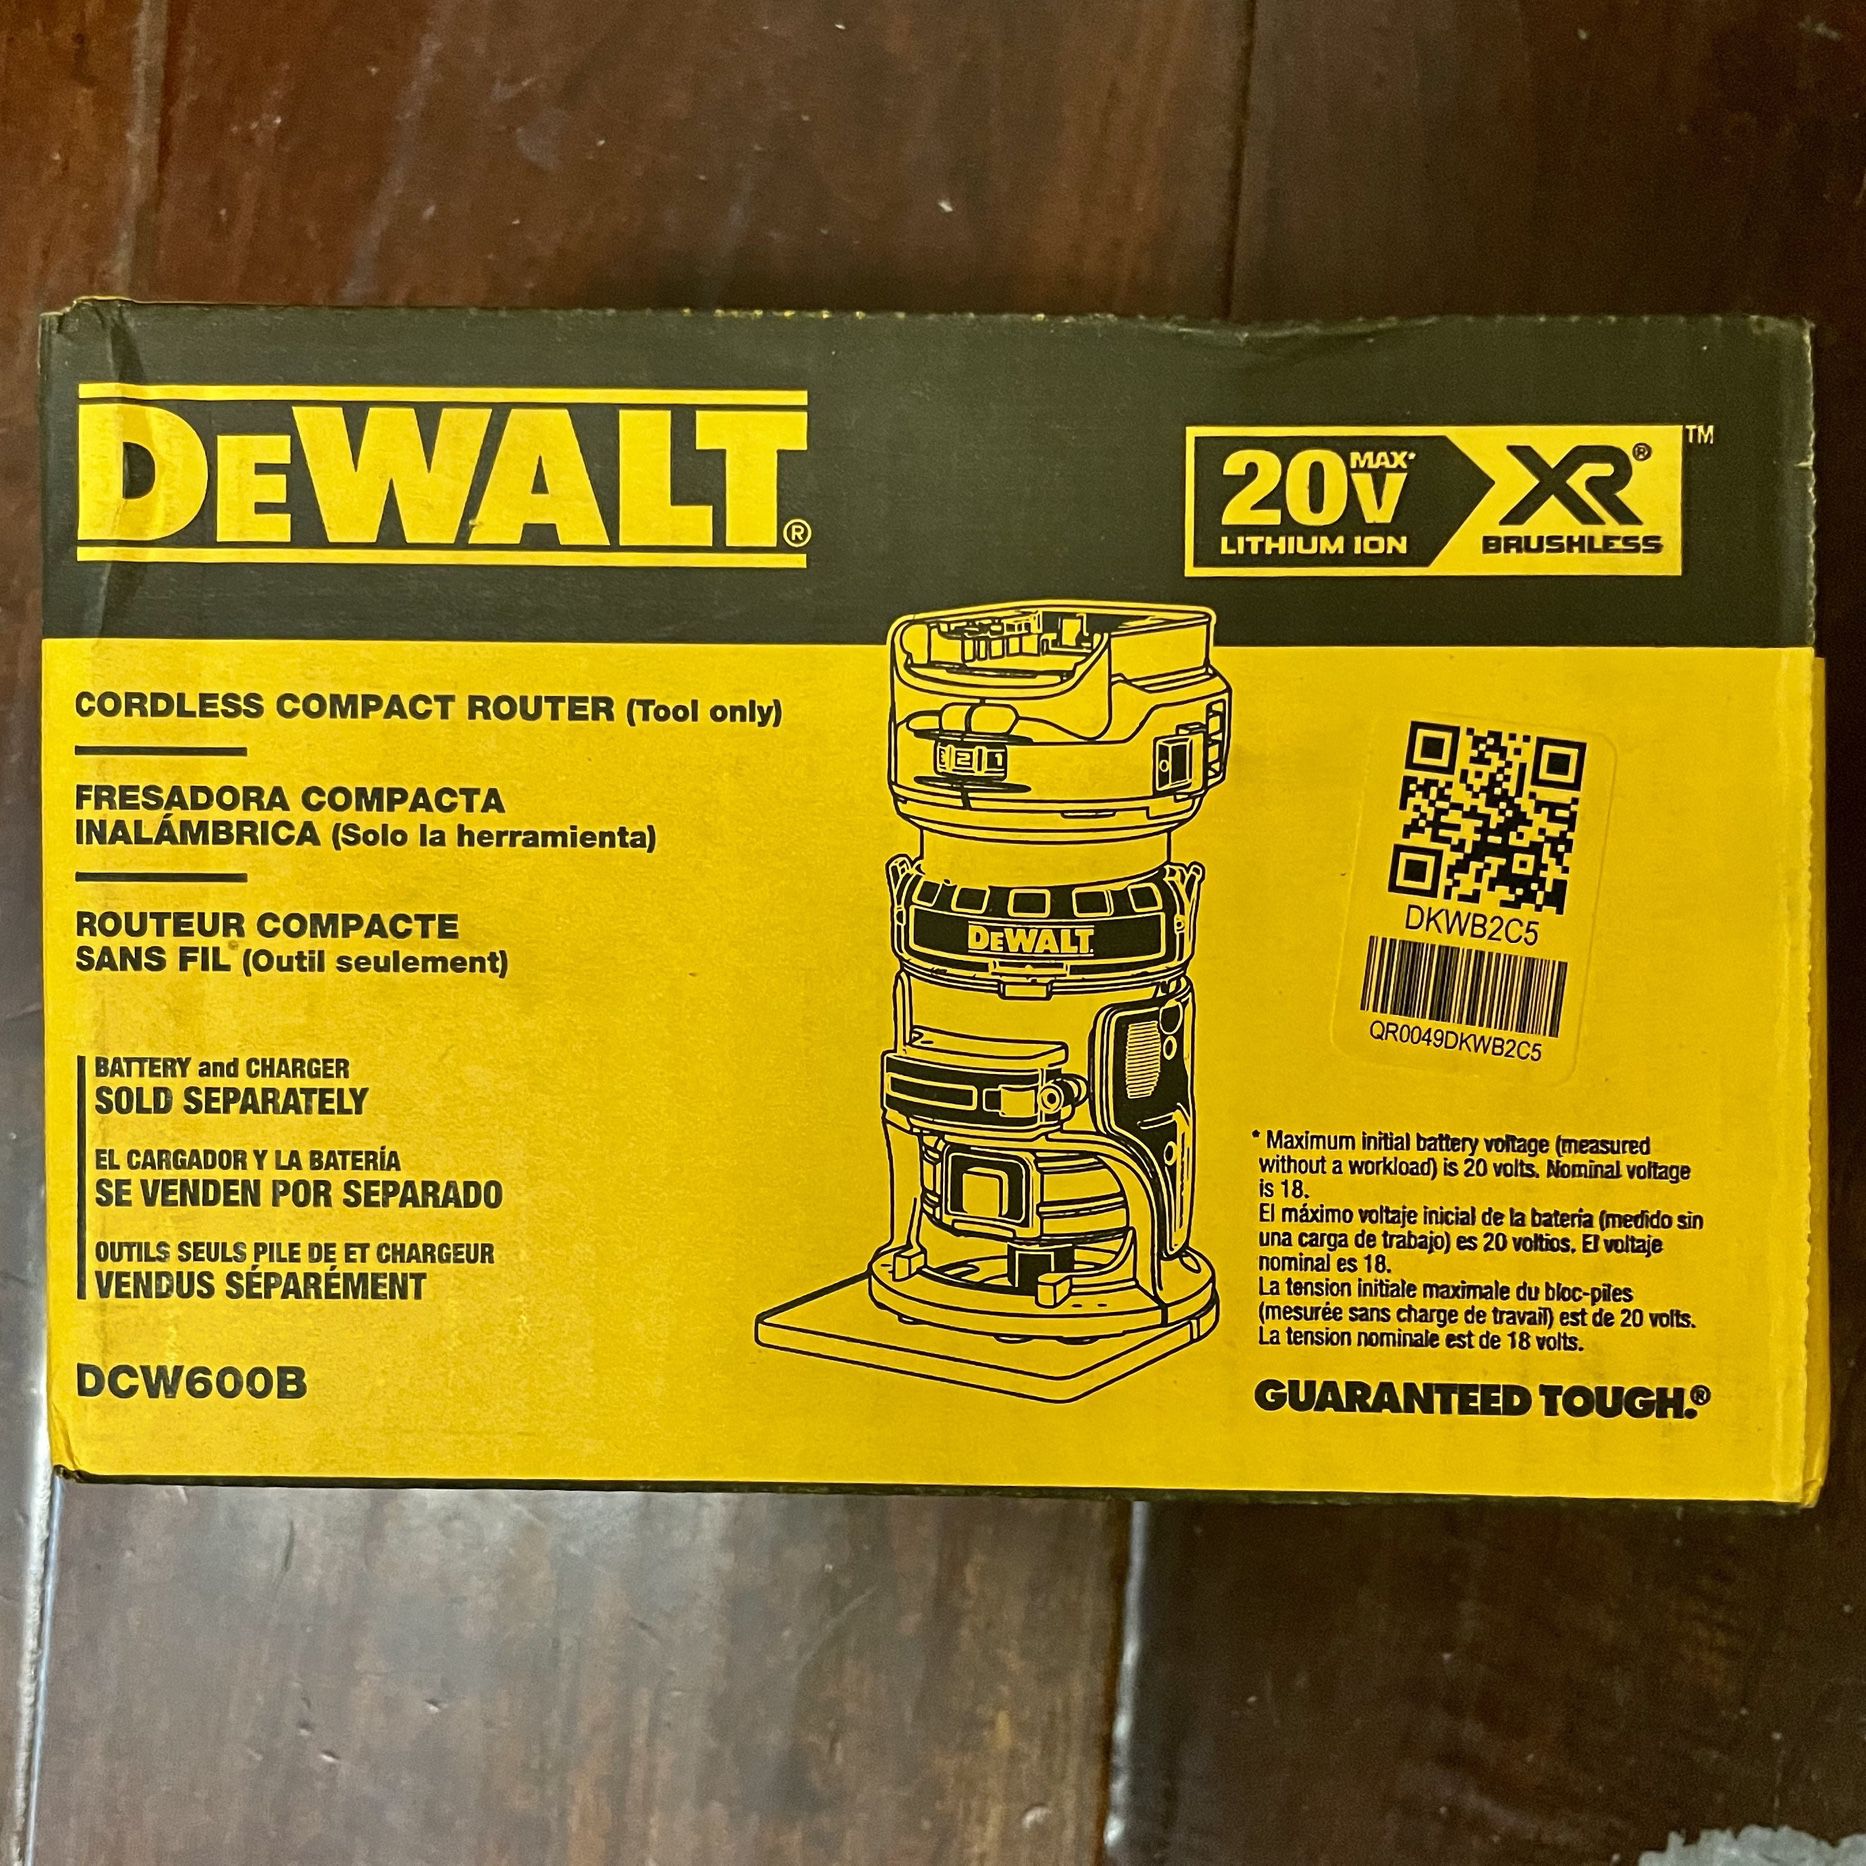 DEWALT 20V MAX XR Cordless Brushless Fixed Base Compact Router (Tool Only)  DCW600B for Sale in Irvine, CA OfferUp